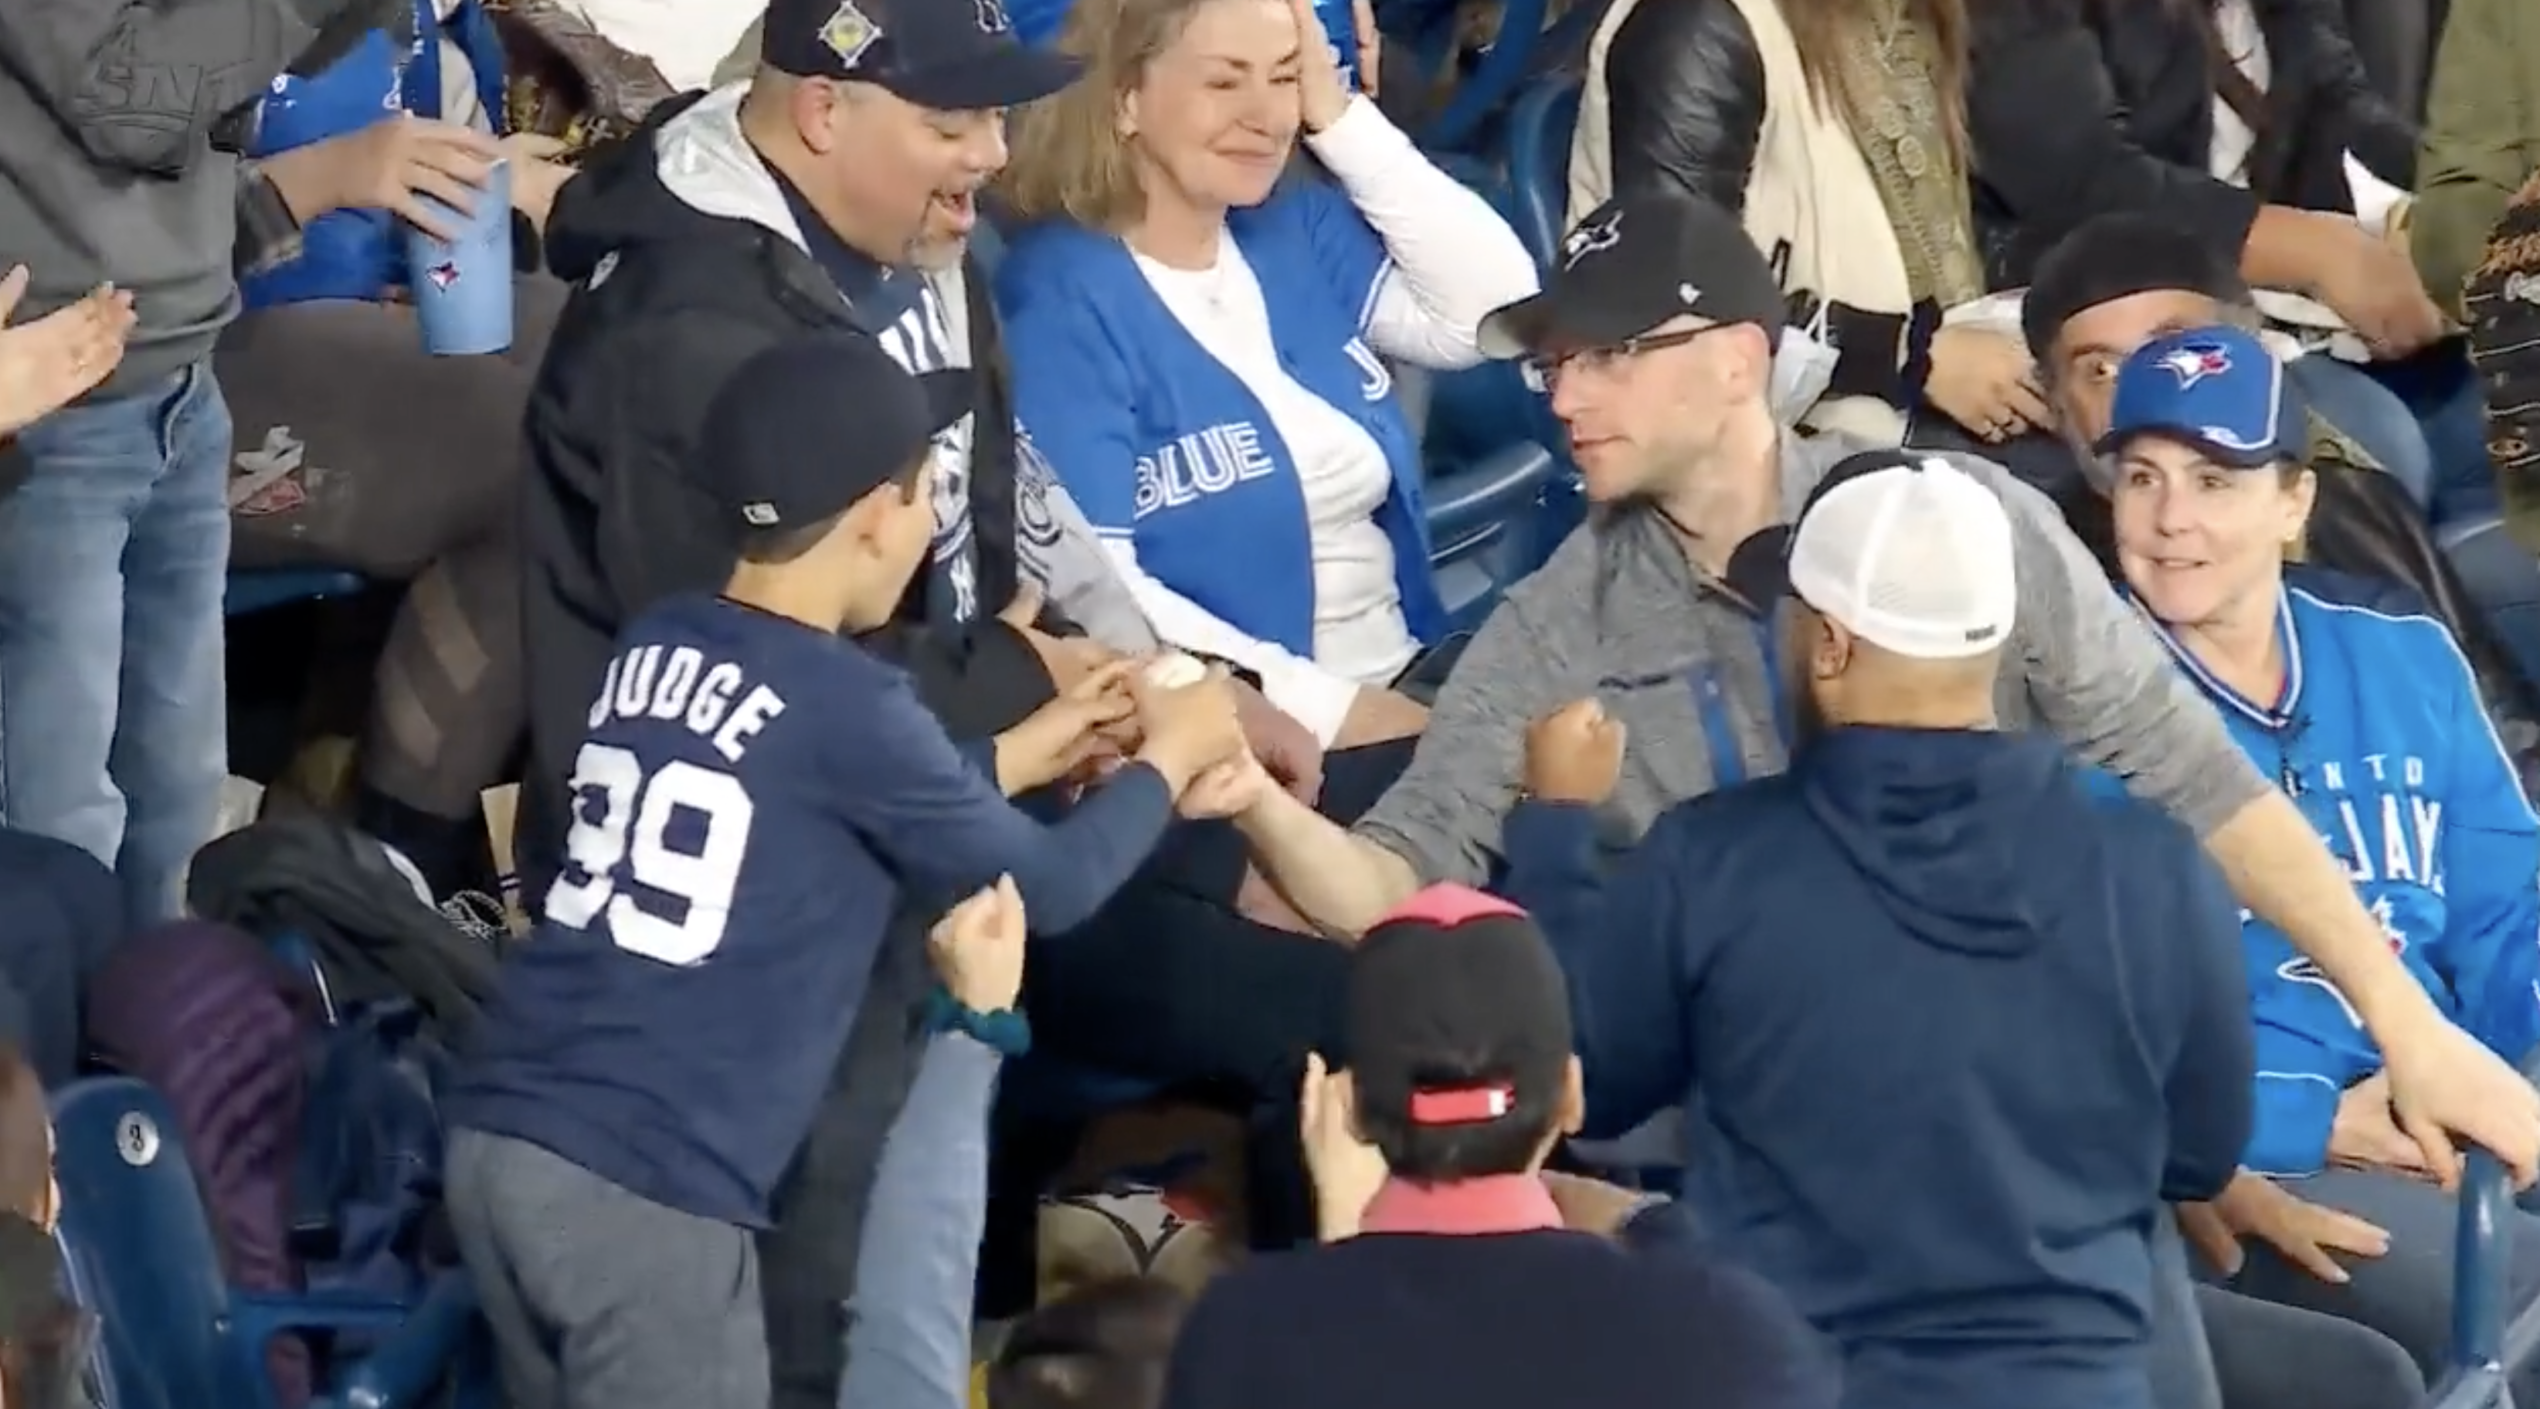 Blue Jays Fan Gives Home Run Ball to Young Yankees Fan